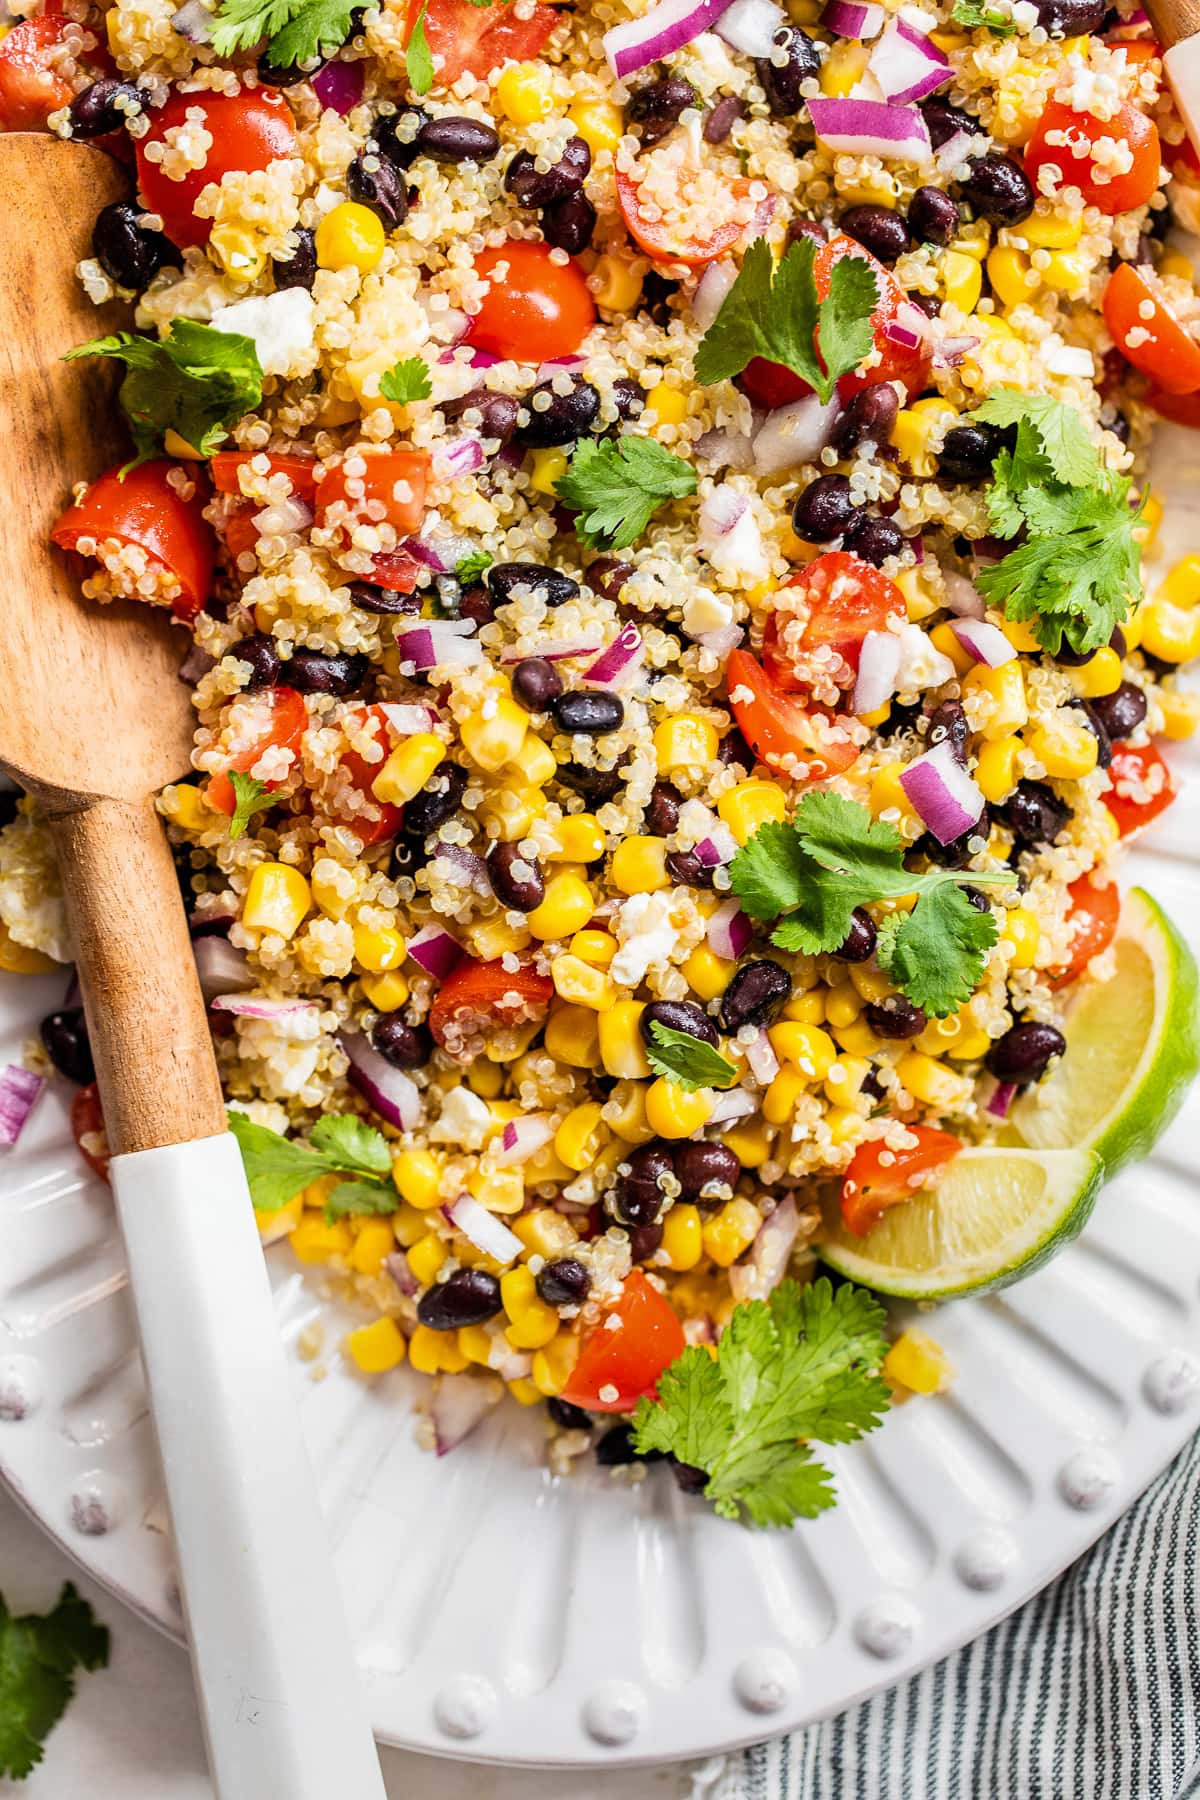 Salad made from quinoa, corn, black beans, tomatoes, and cotija cheese.